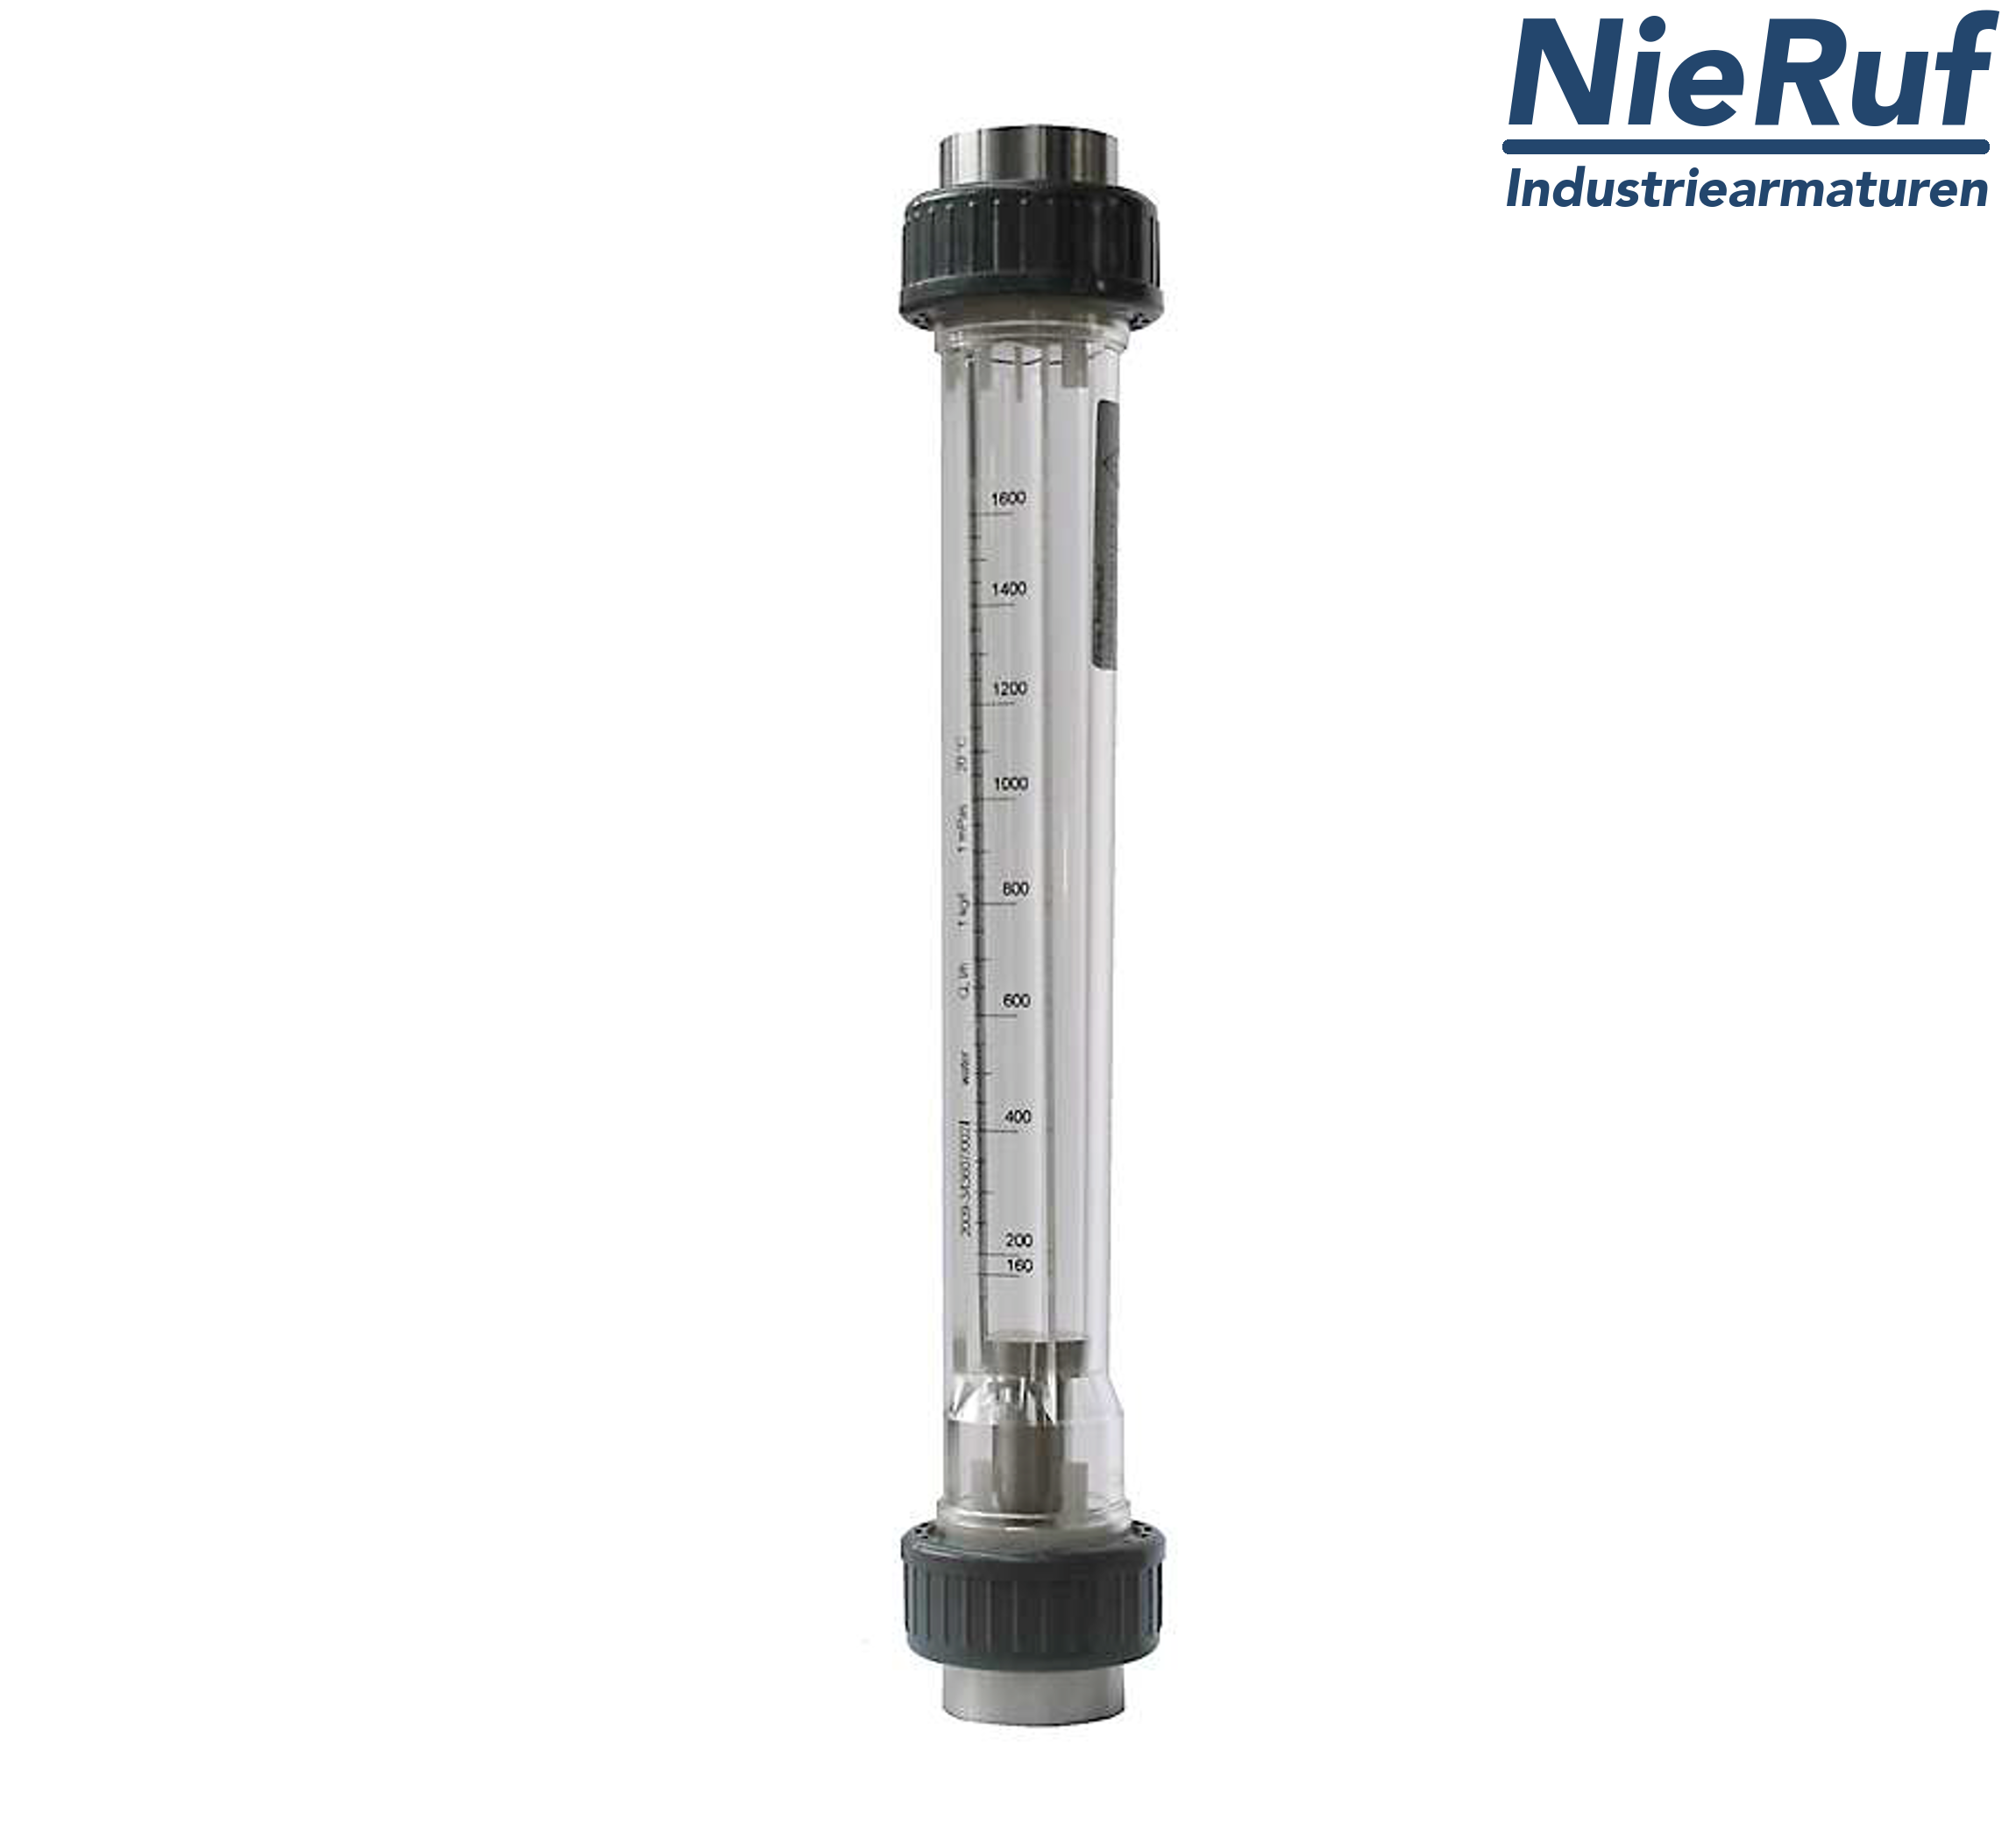 Variable area flowmeter 2" inch 4000.0 - 16000 l/h water NBR